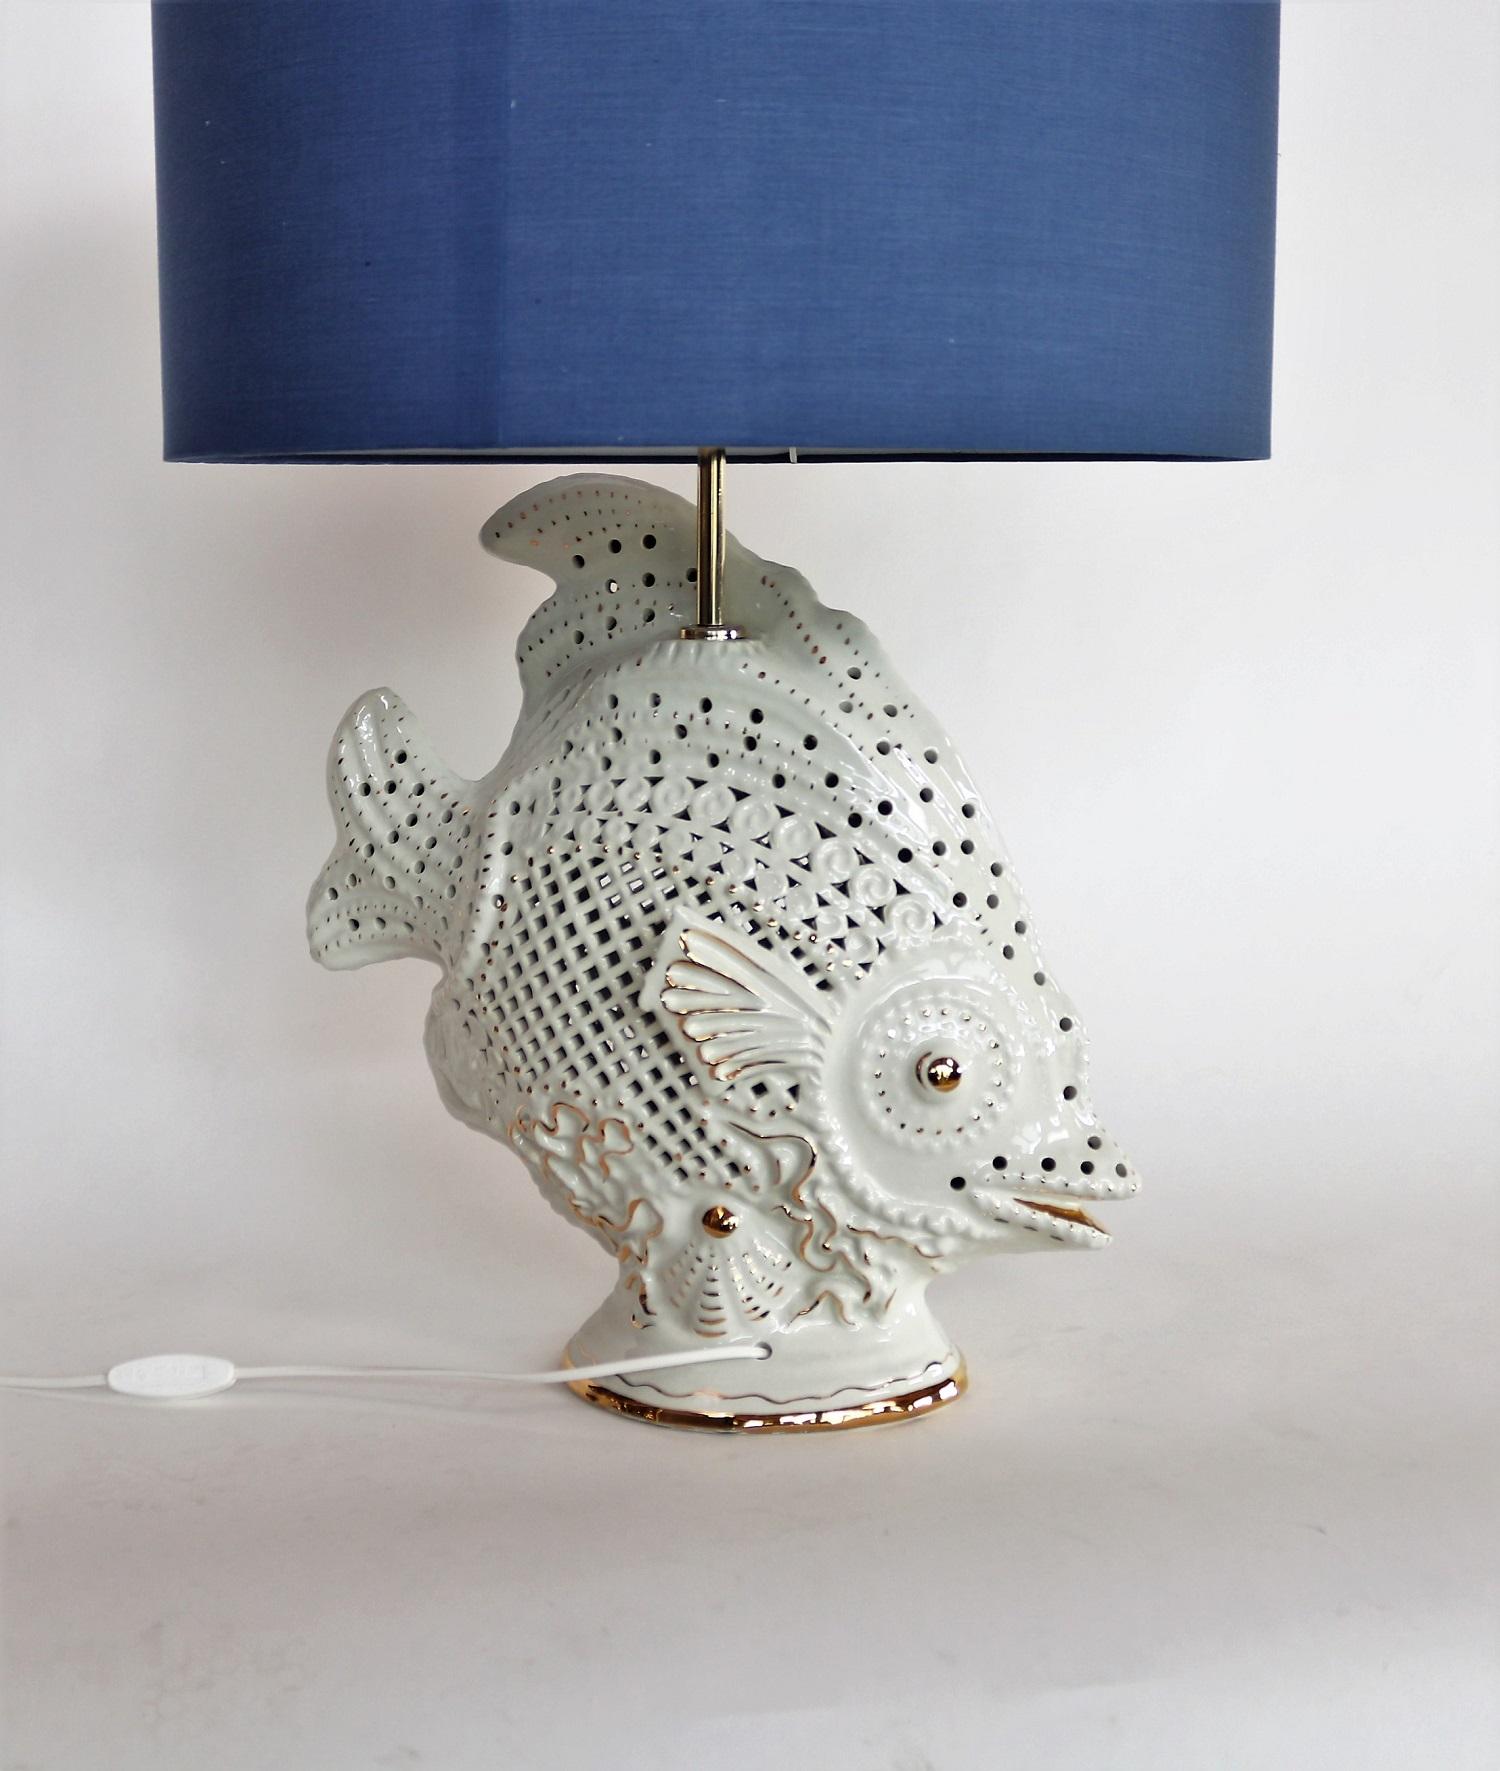 Italian Midcentury Big Ceramic Fish Lamp with Brass Details, 1960s For Sale 1